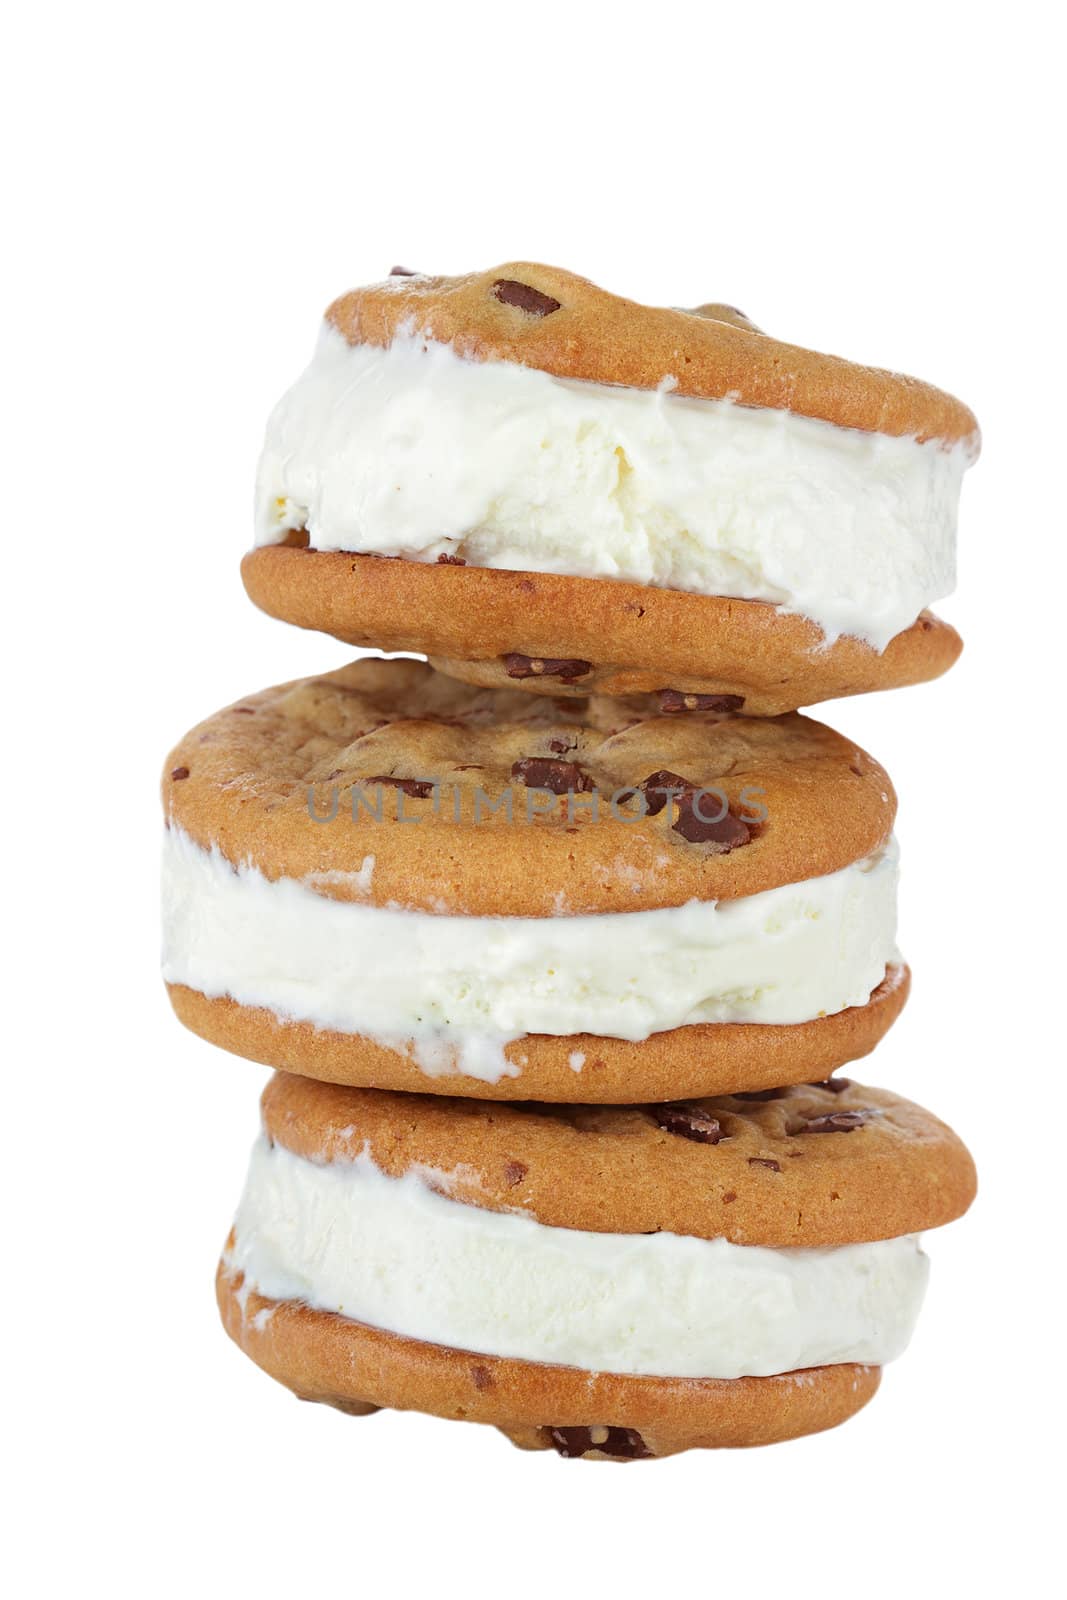 Chocolate Chip Cookie Ice Cream Sandwich isolated on white background.
